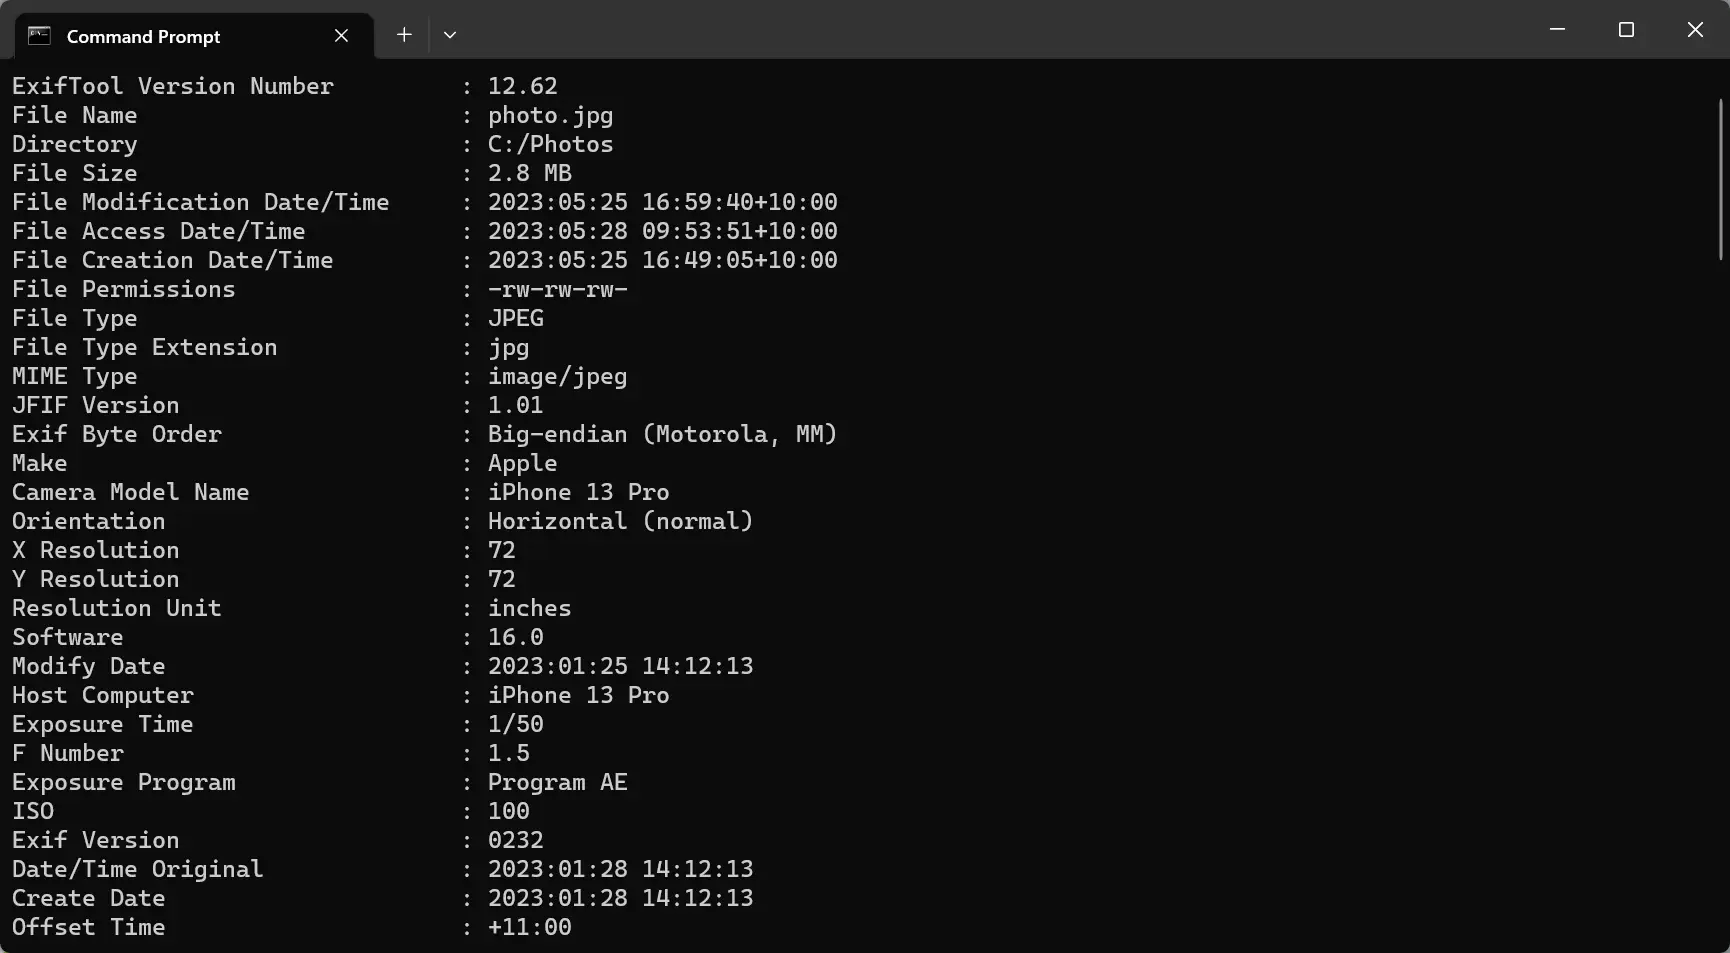 Windows Command Prompt window showing metadata of a photo using Exiftool.